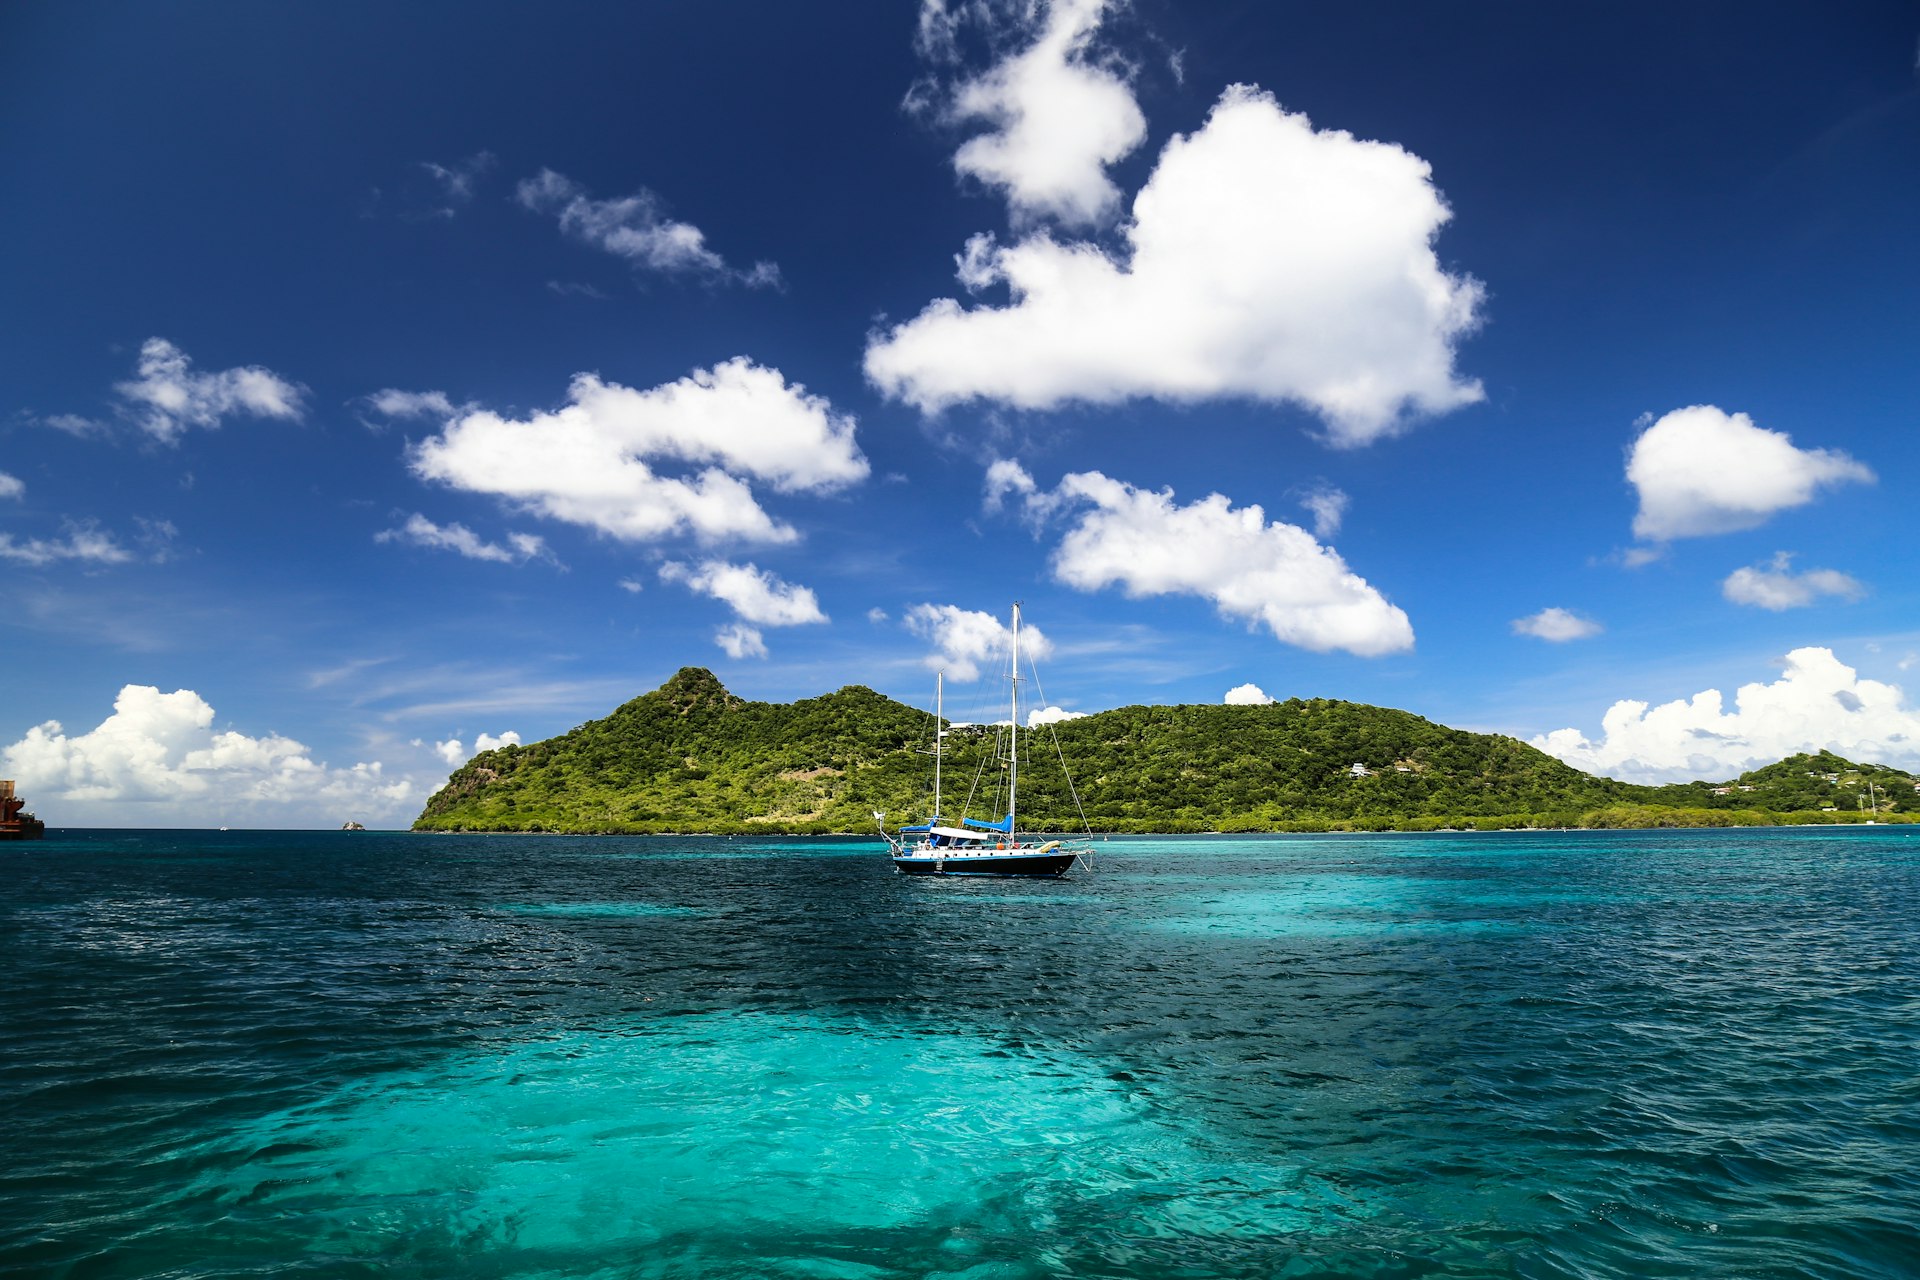 Bright clear waters in Carriacou, Grenada